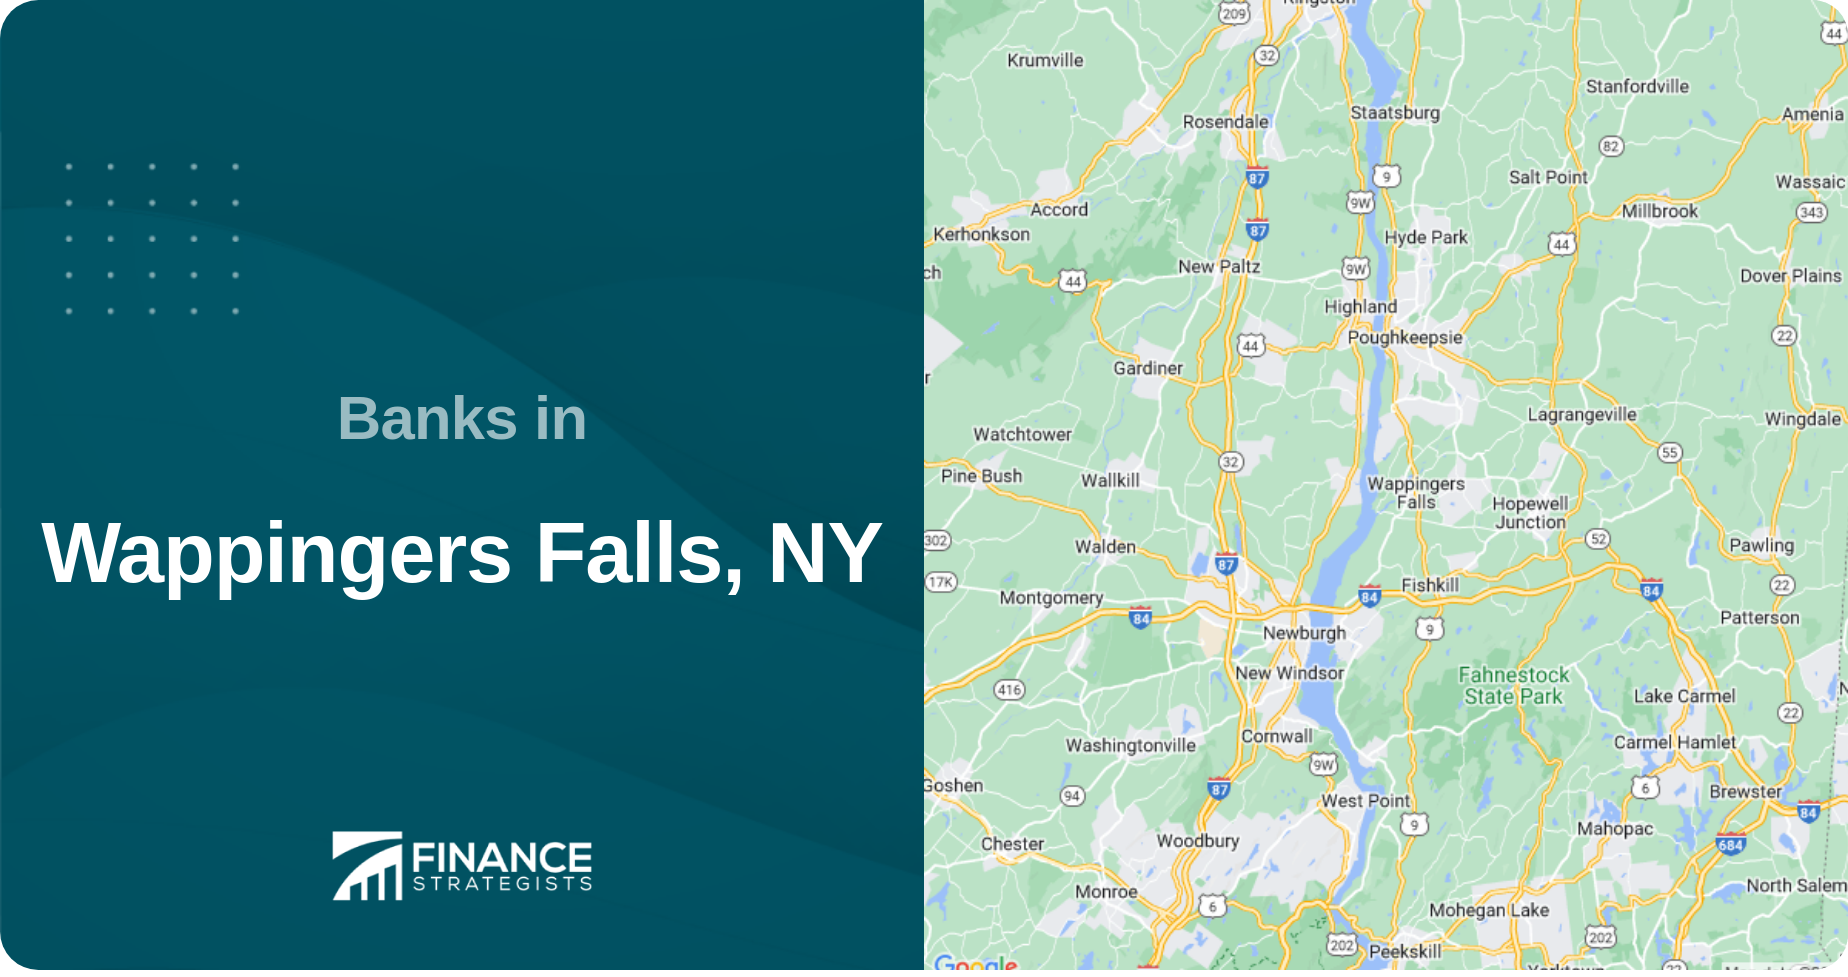 Banks in Wappingers Falls, NY